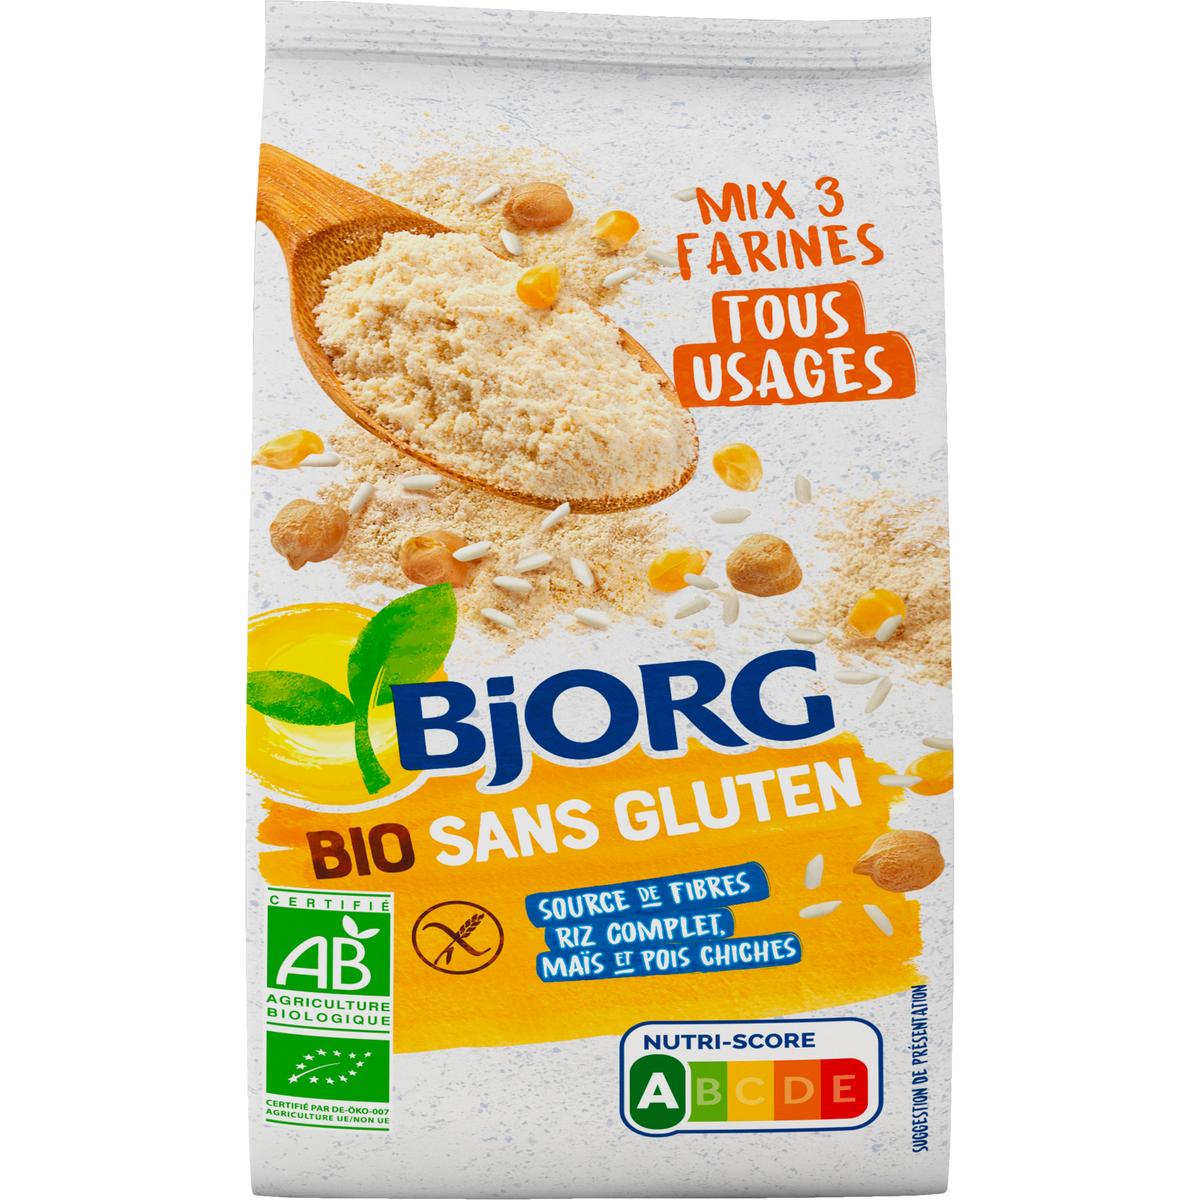 Achat Promotion Borg Mix 3 Farines